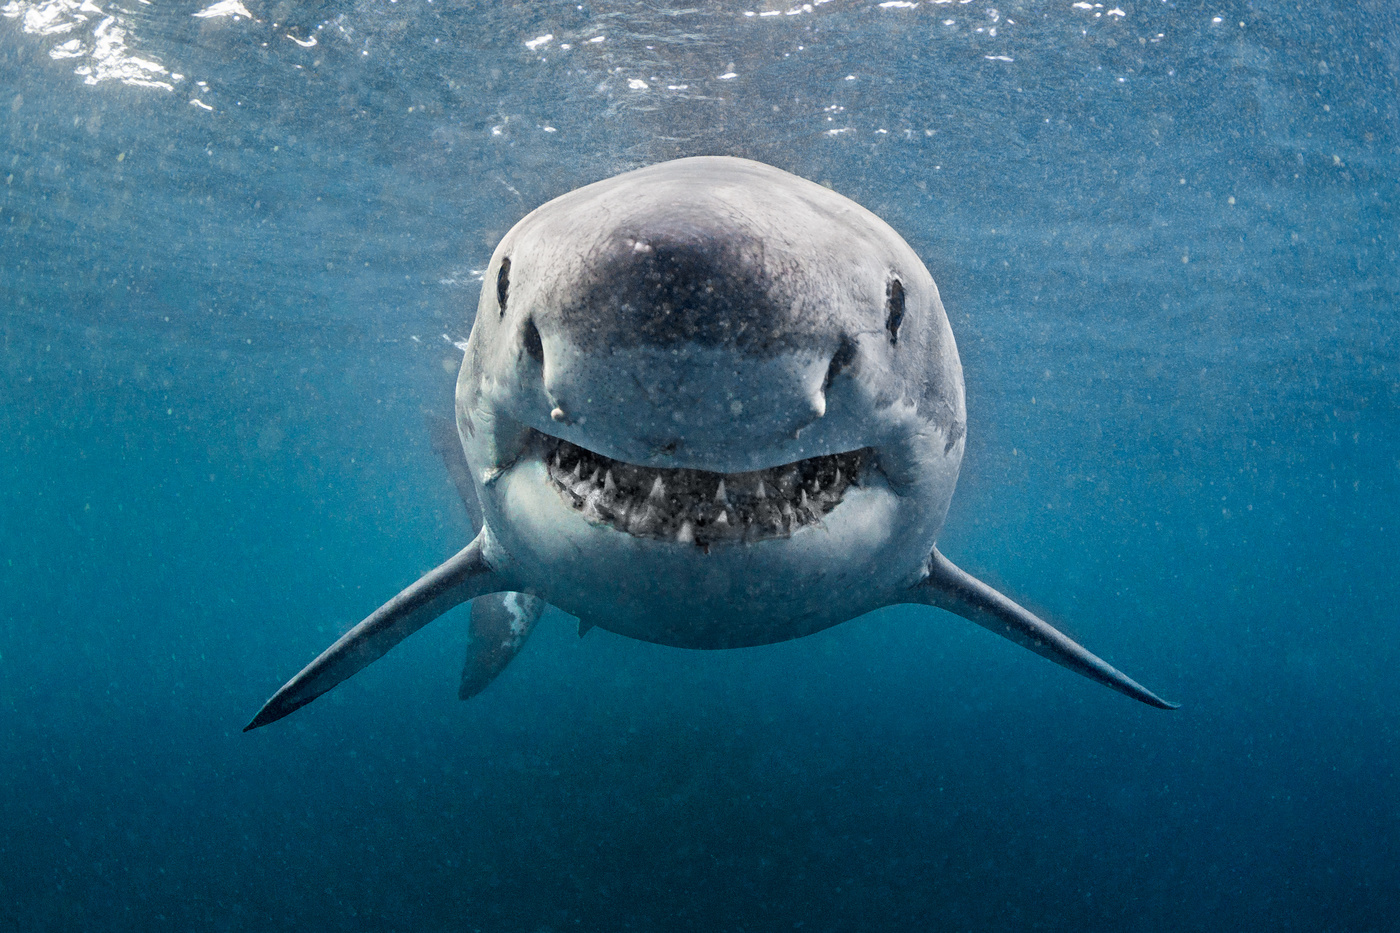 Great White Shark off the coast of South Africa